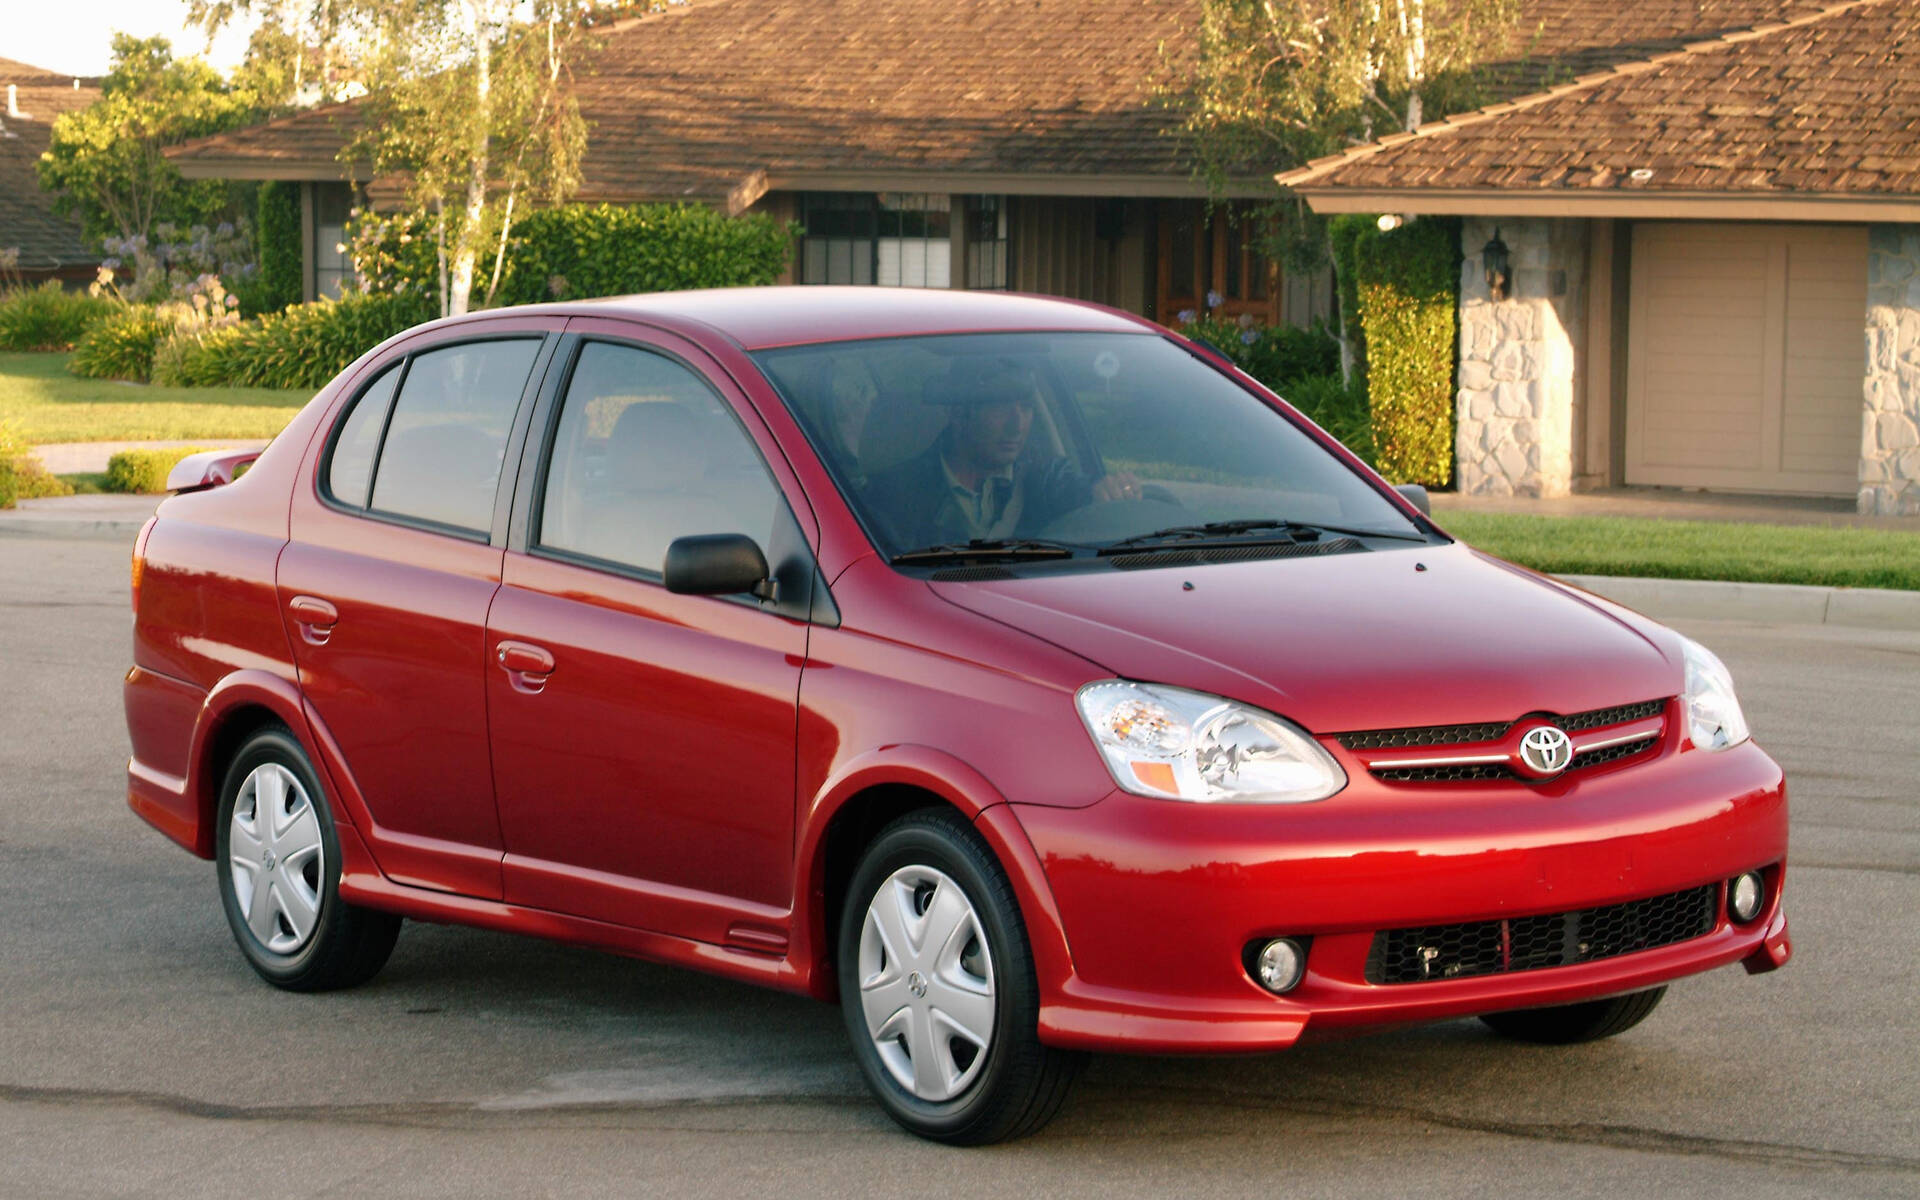 <p><strong>Toyota Echo 2005</strong></p>